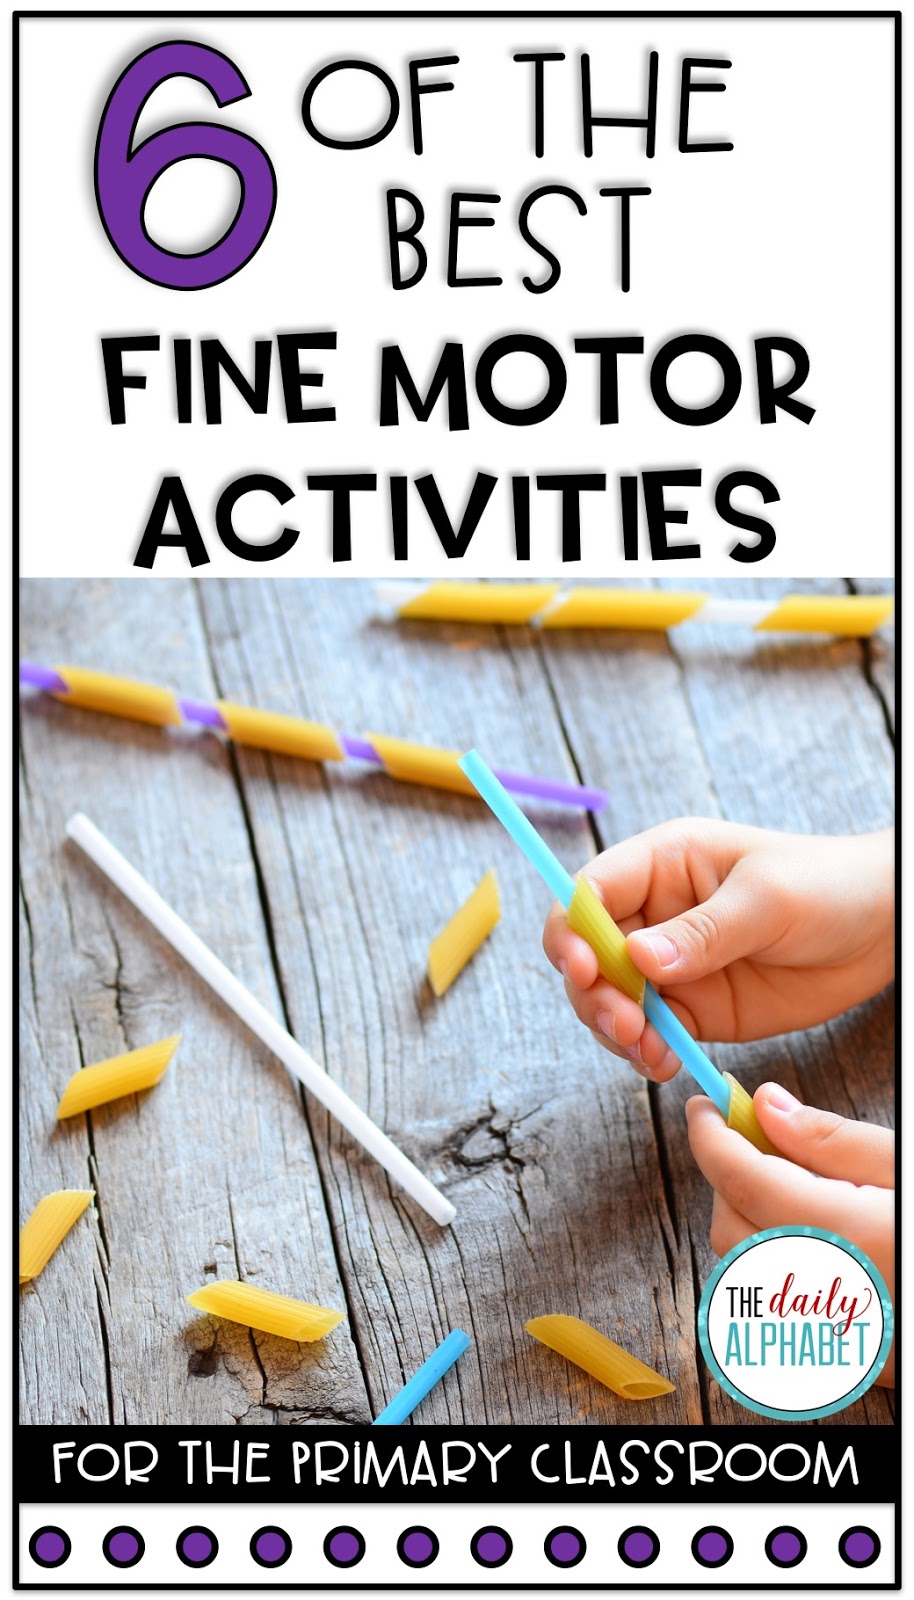 6 of the Best Fine Motor Activities - The Daily Alphabet